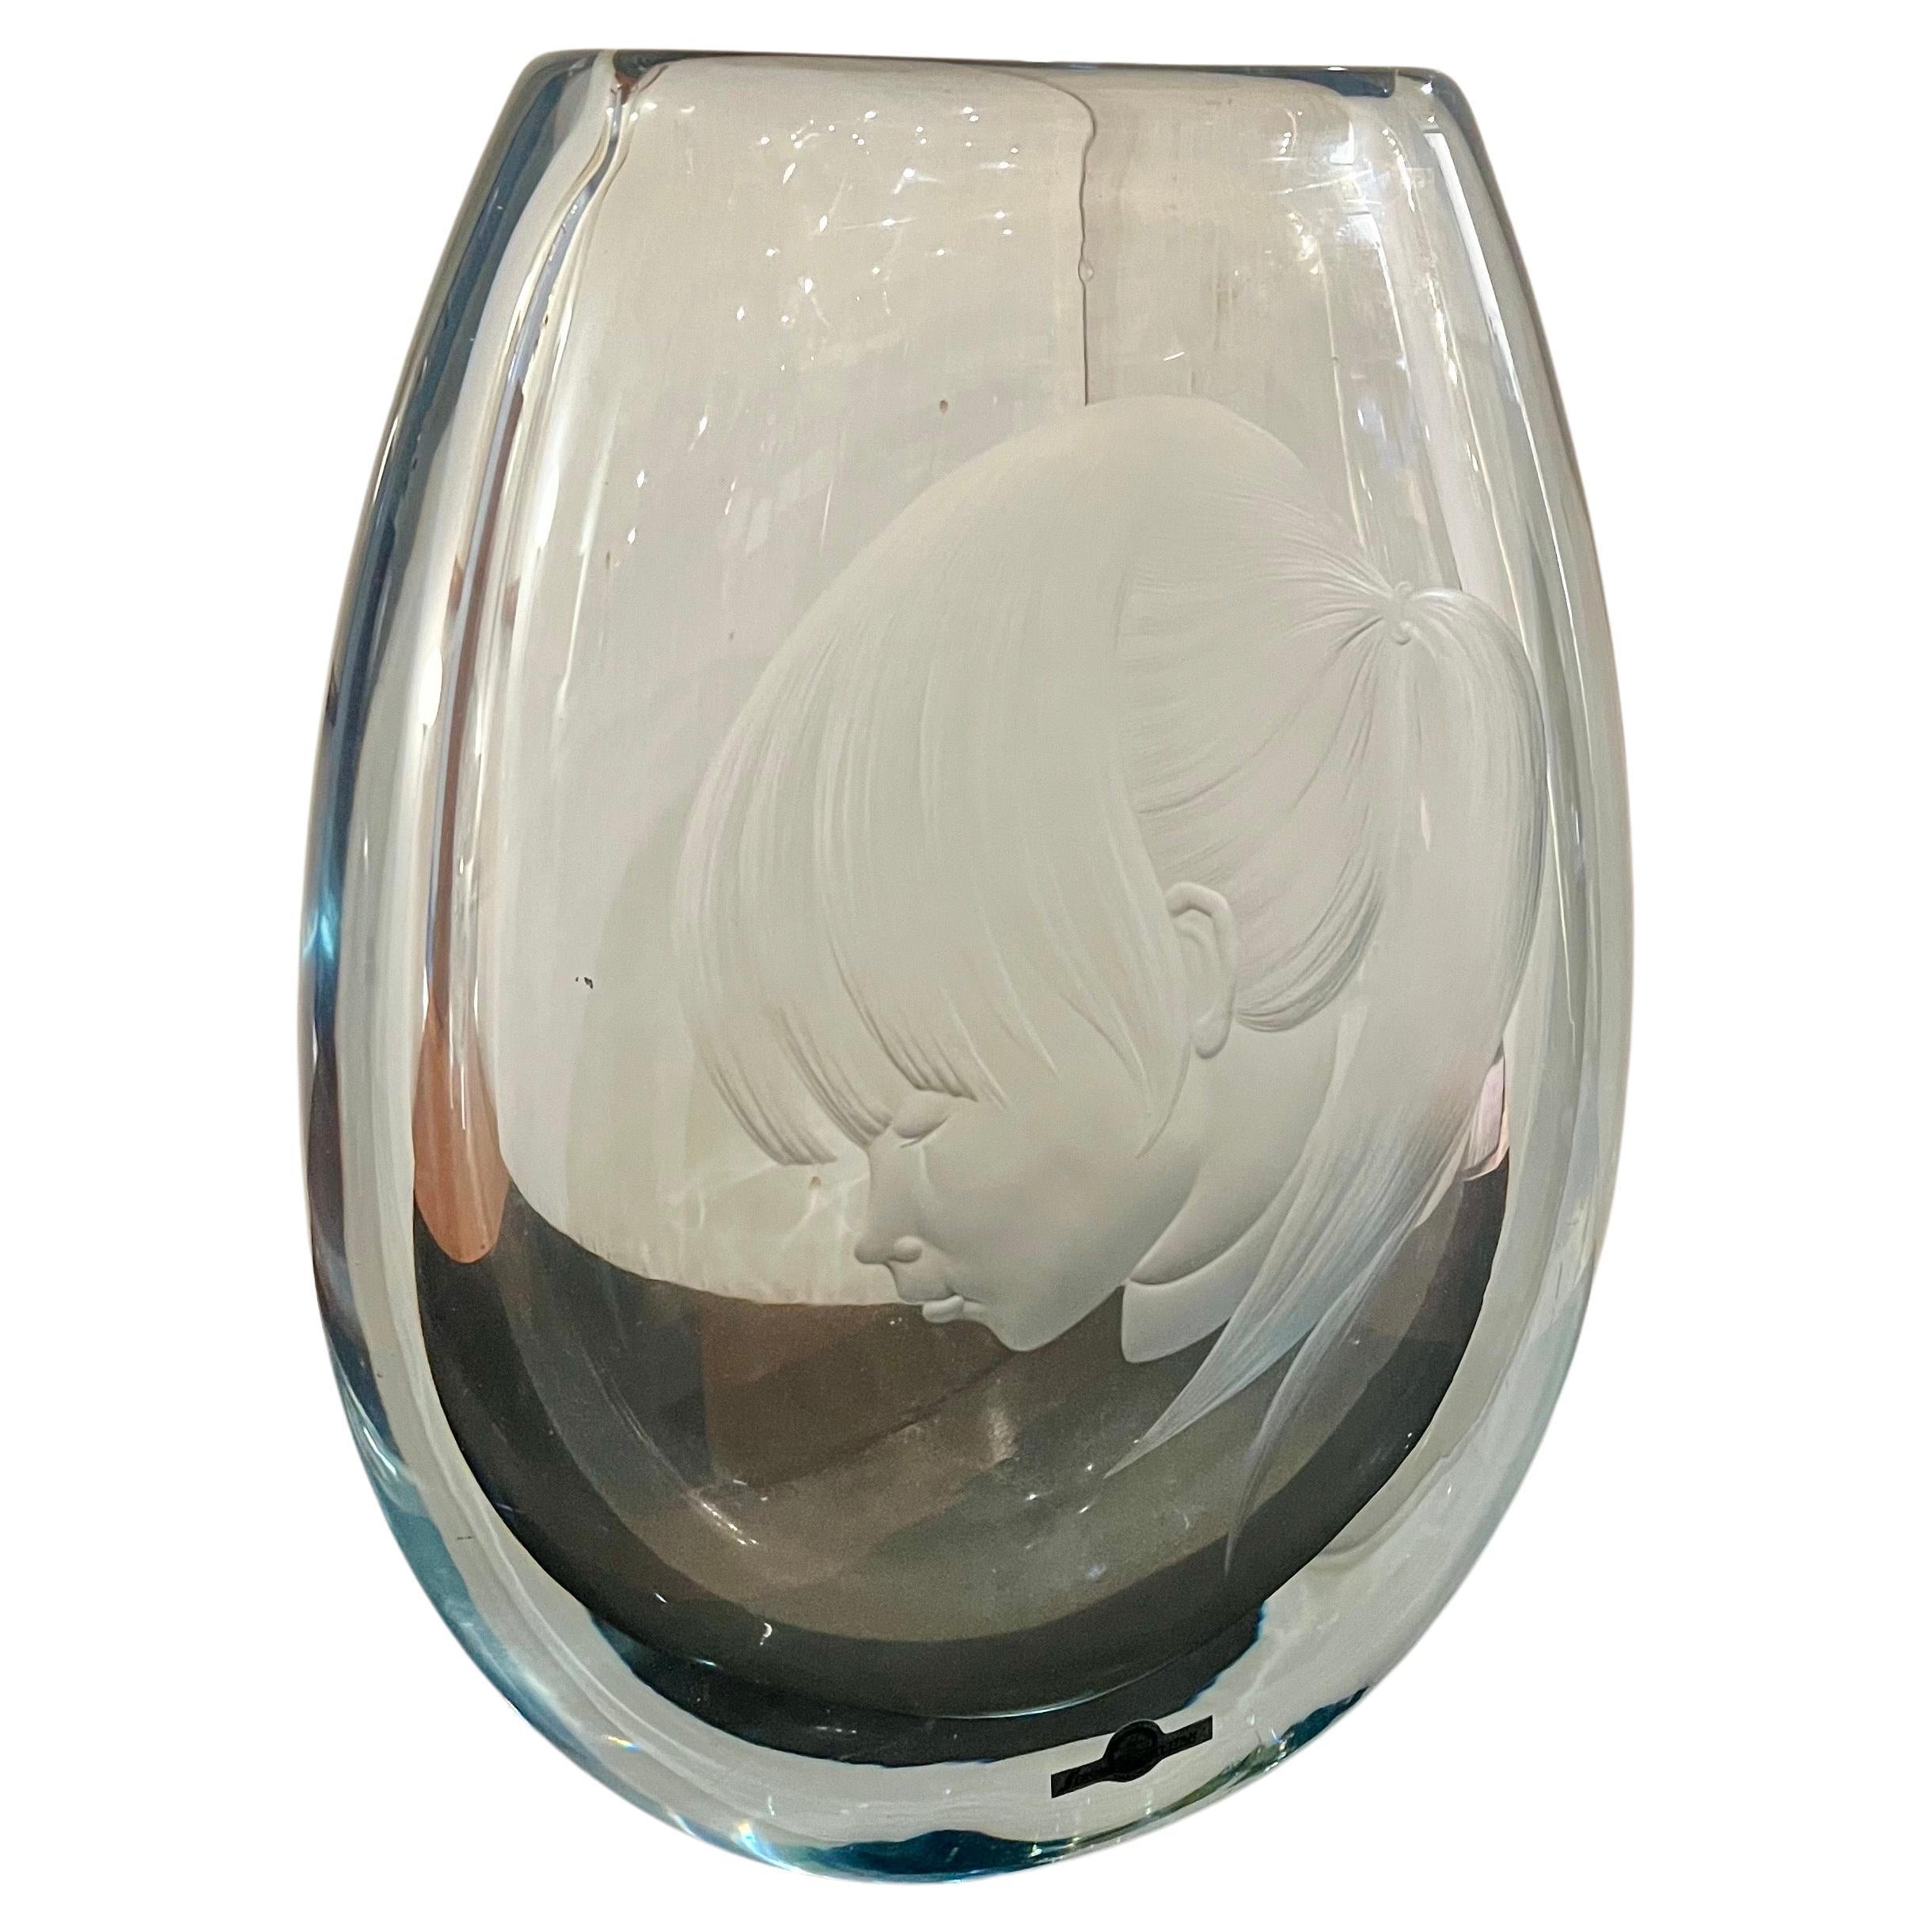 A masterful execution in this beautiful and large piece of Swedish art glass from Strombergshyttan Glass Company. On the front side is a beautiful girl's face, The glass has Stromberg's distinctive silver-blue tint. retains label and it's signed at